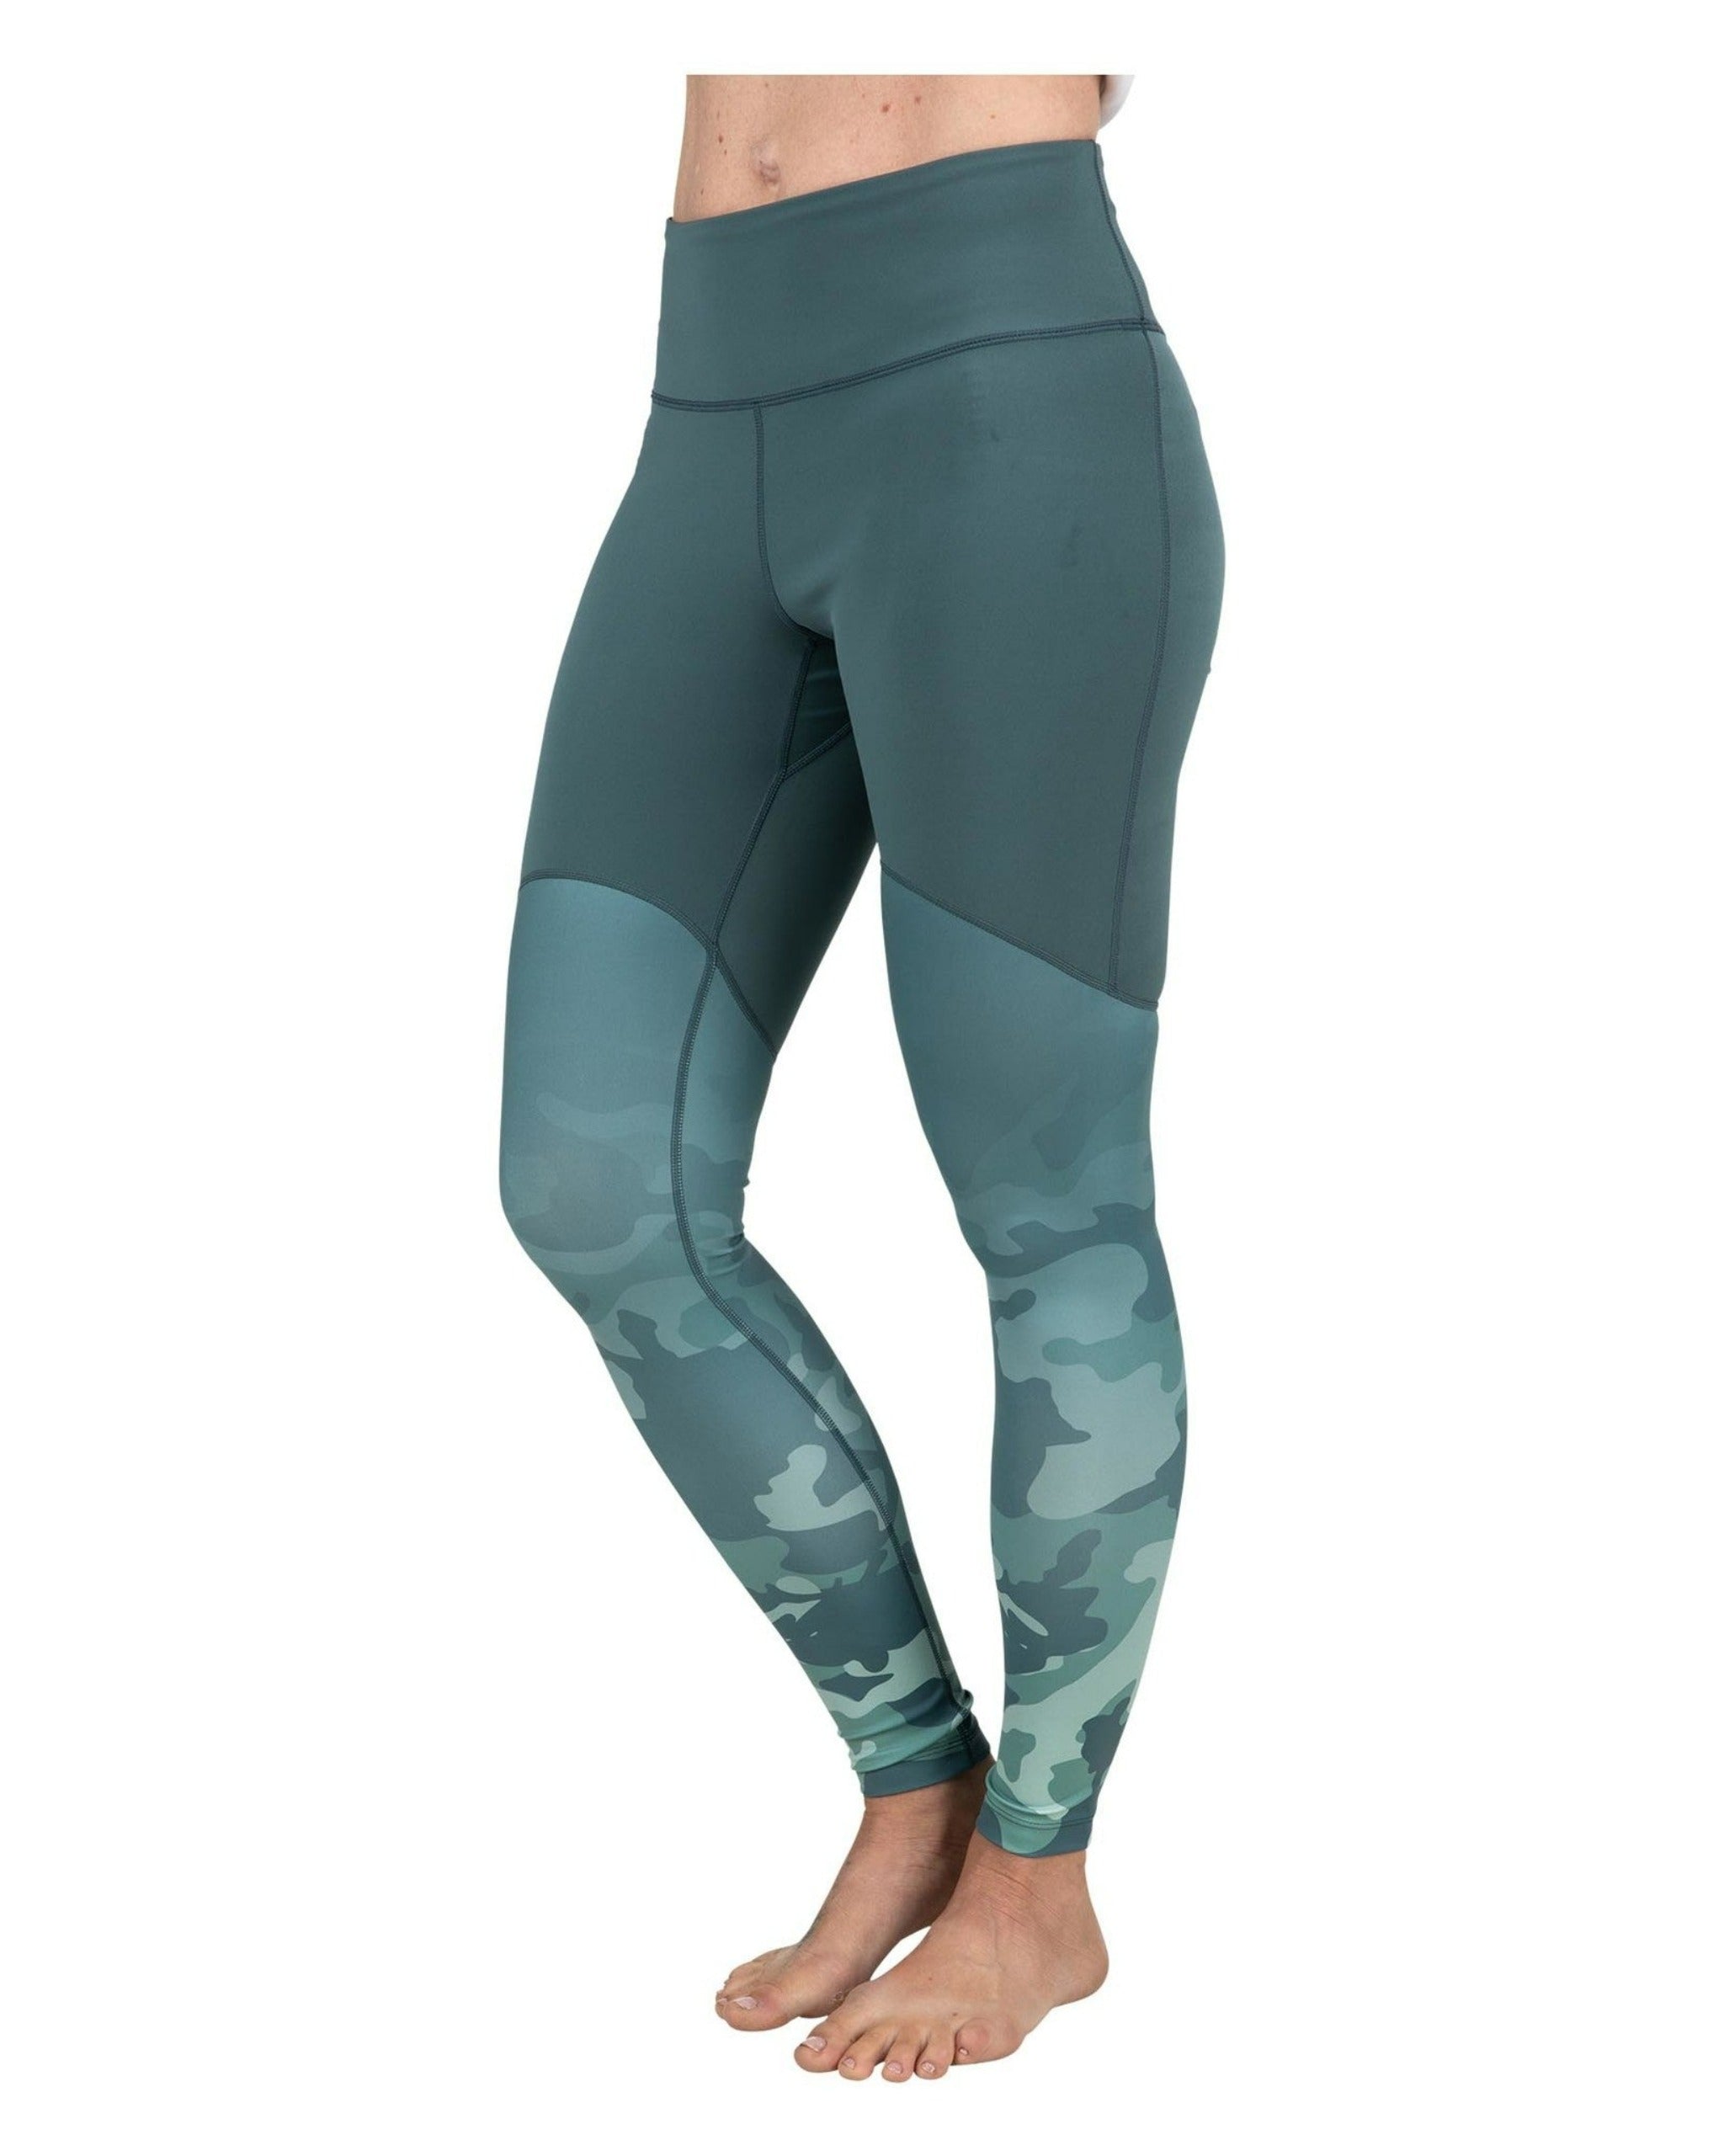 Women's Compression Tights - Fashionable & Functional